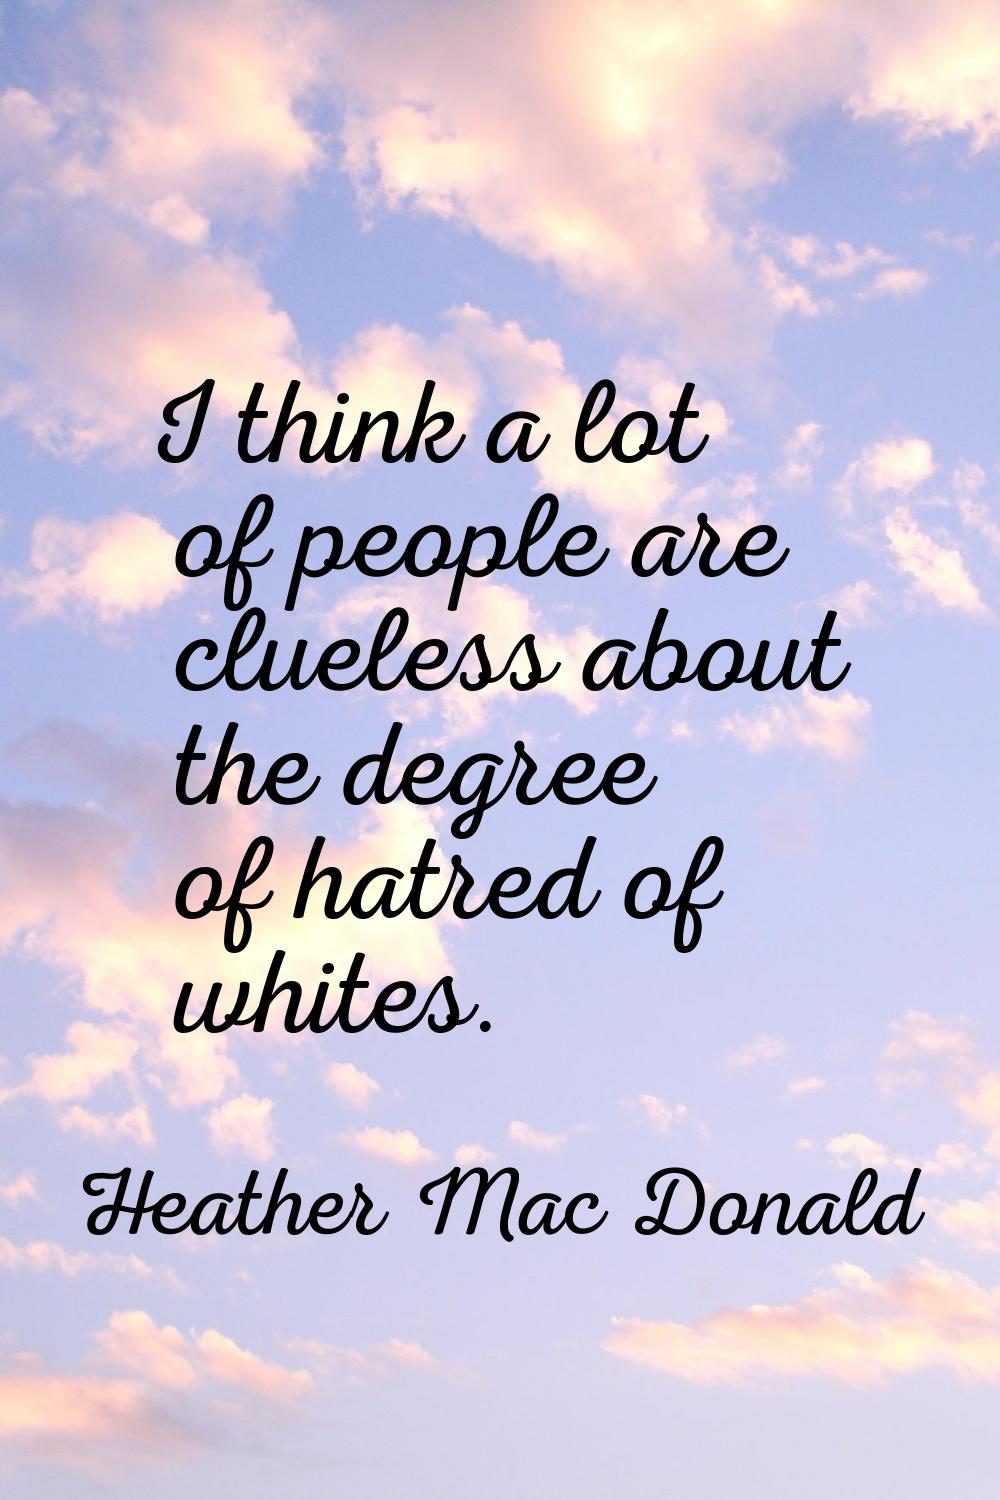 I think a lot of people are clueless about the degree of hatred of whites.